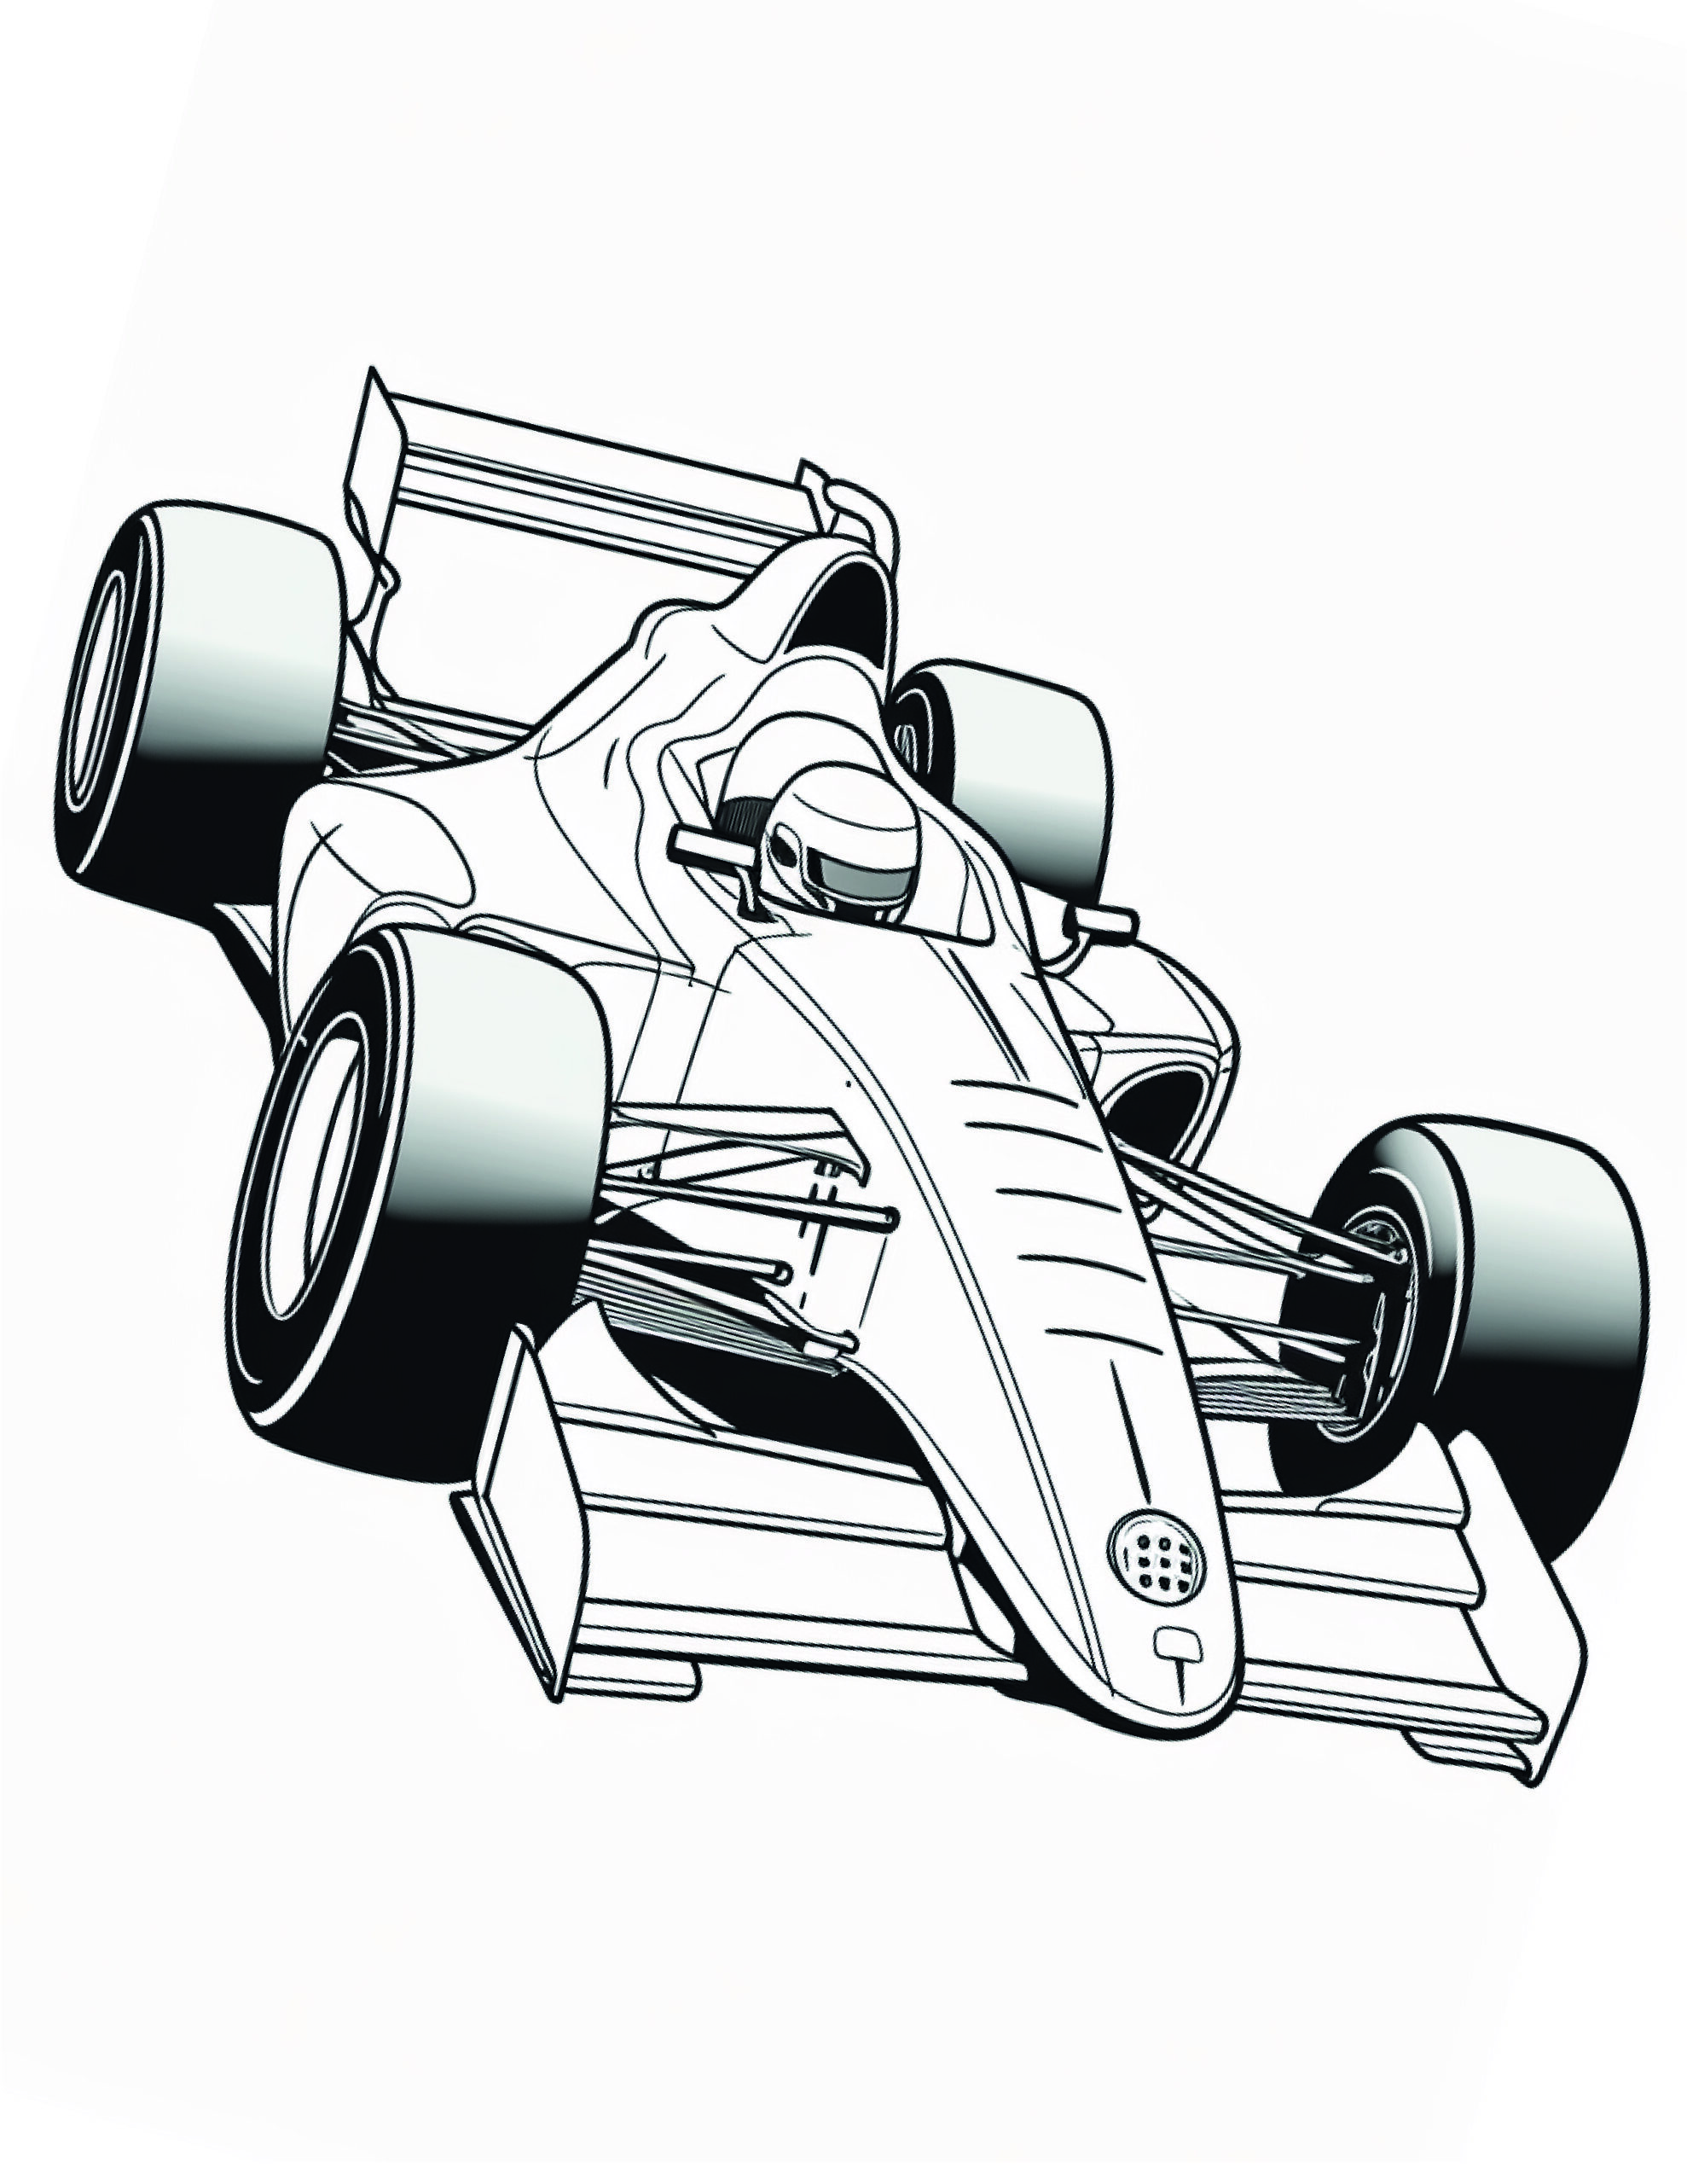 Race Car Coloring Page 12 - A line drawing of a fast formula one car with large wing.